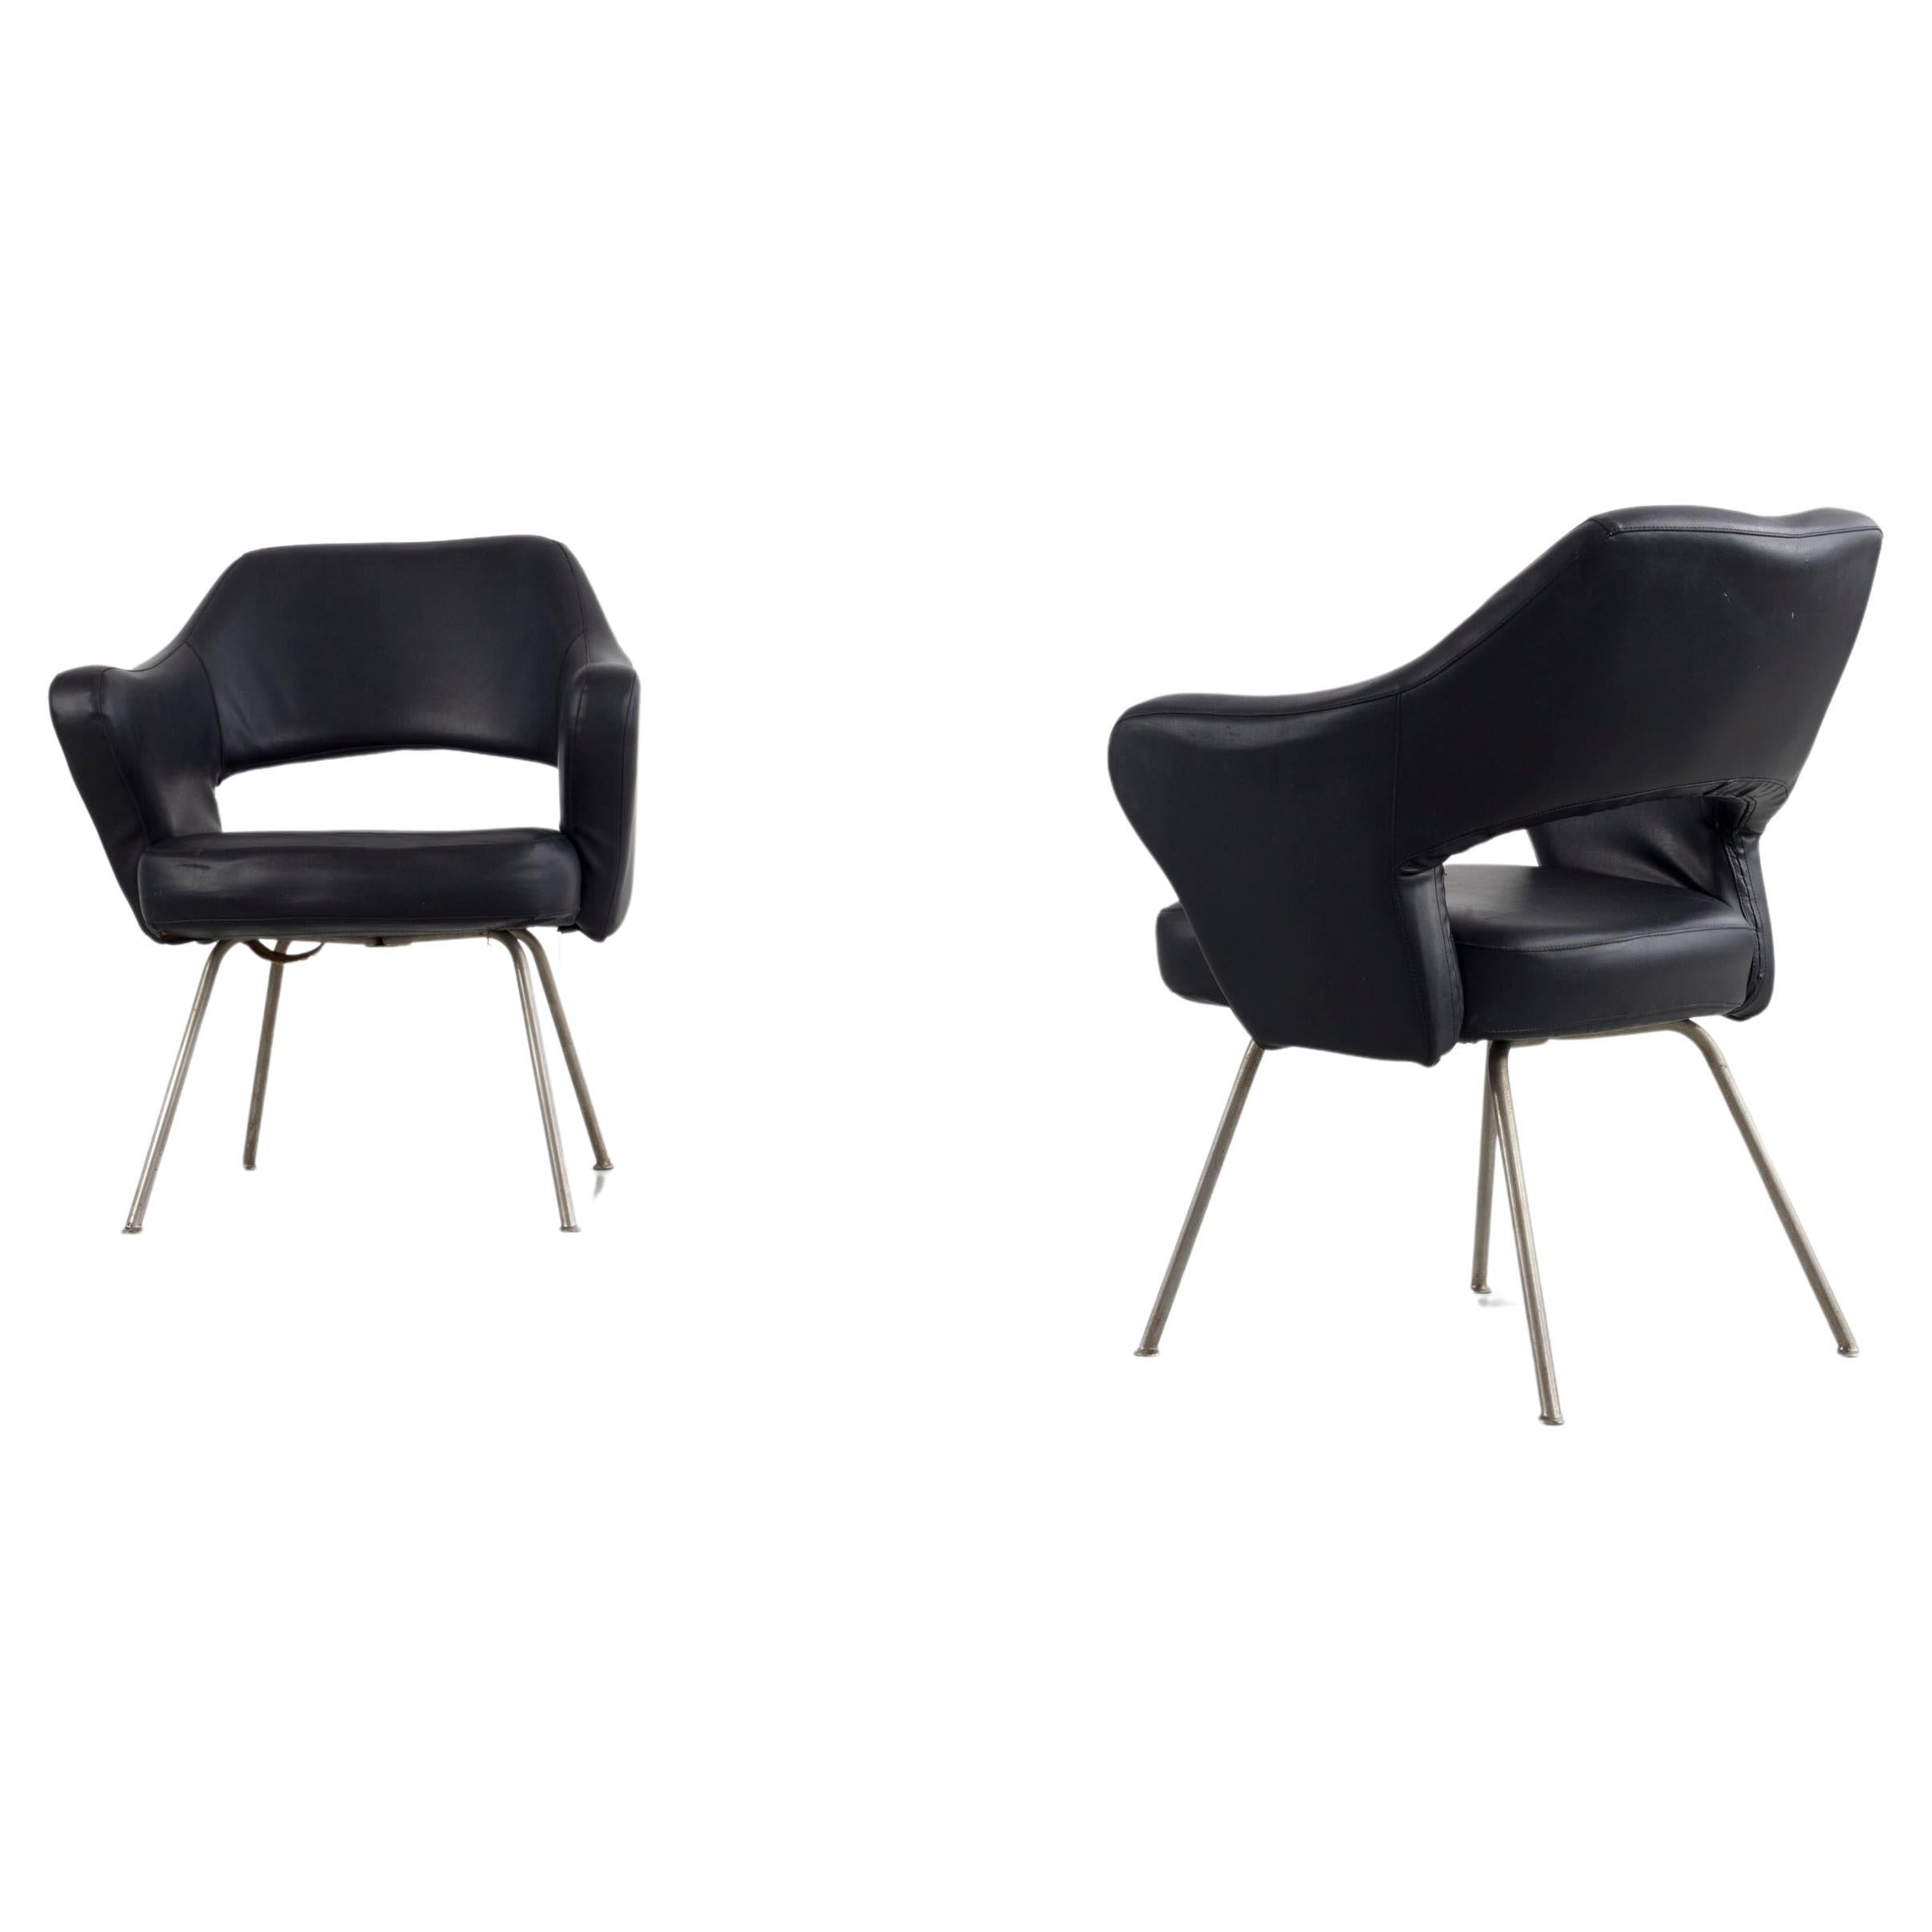 "P16" armchair pair, designed by Gastone Rinaldi and manufactured by Rima, Italy For Sale